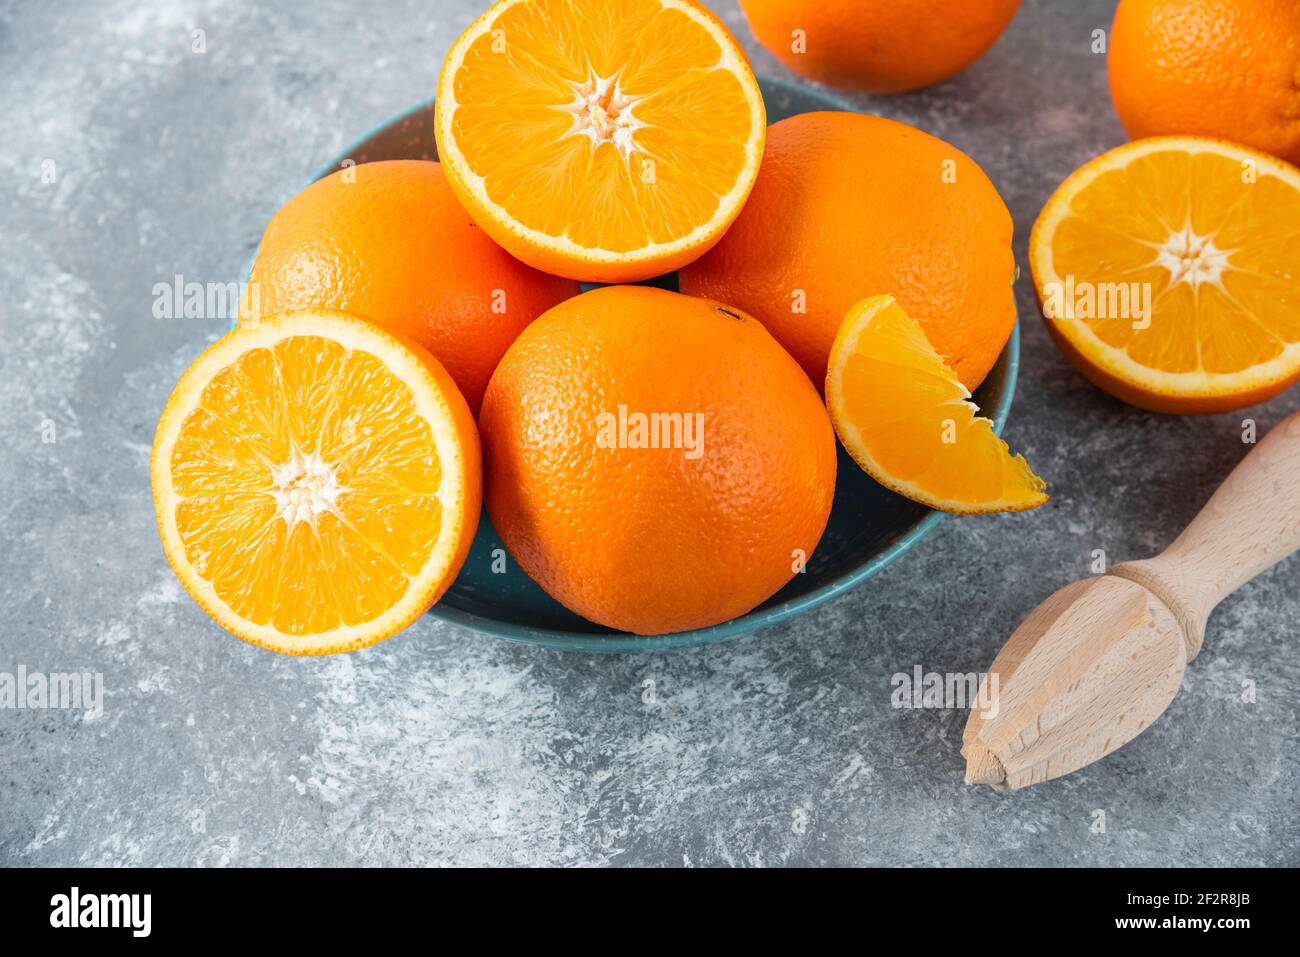 A bowl full of sliced and whole juicy orange fruits with wooden reamer Stock Photo